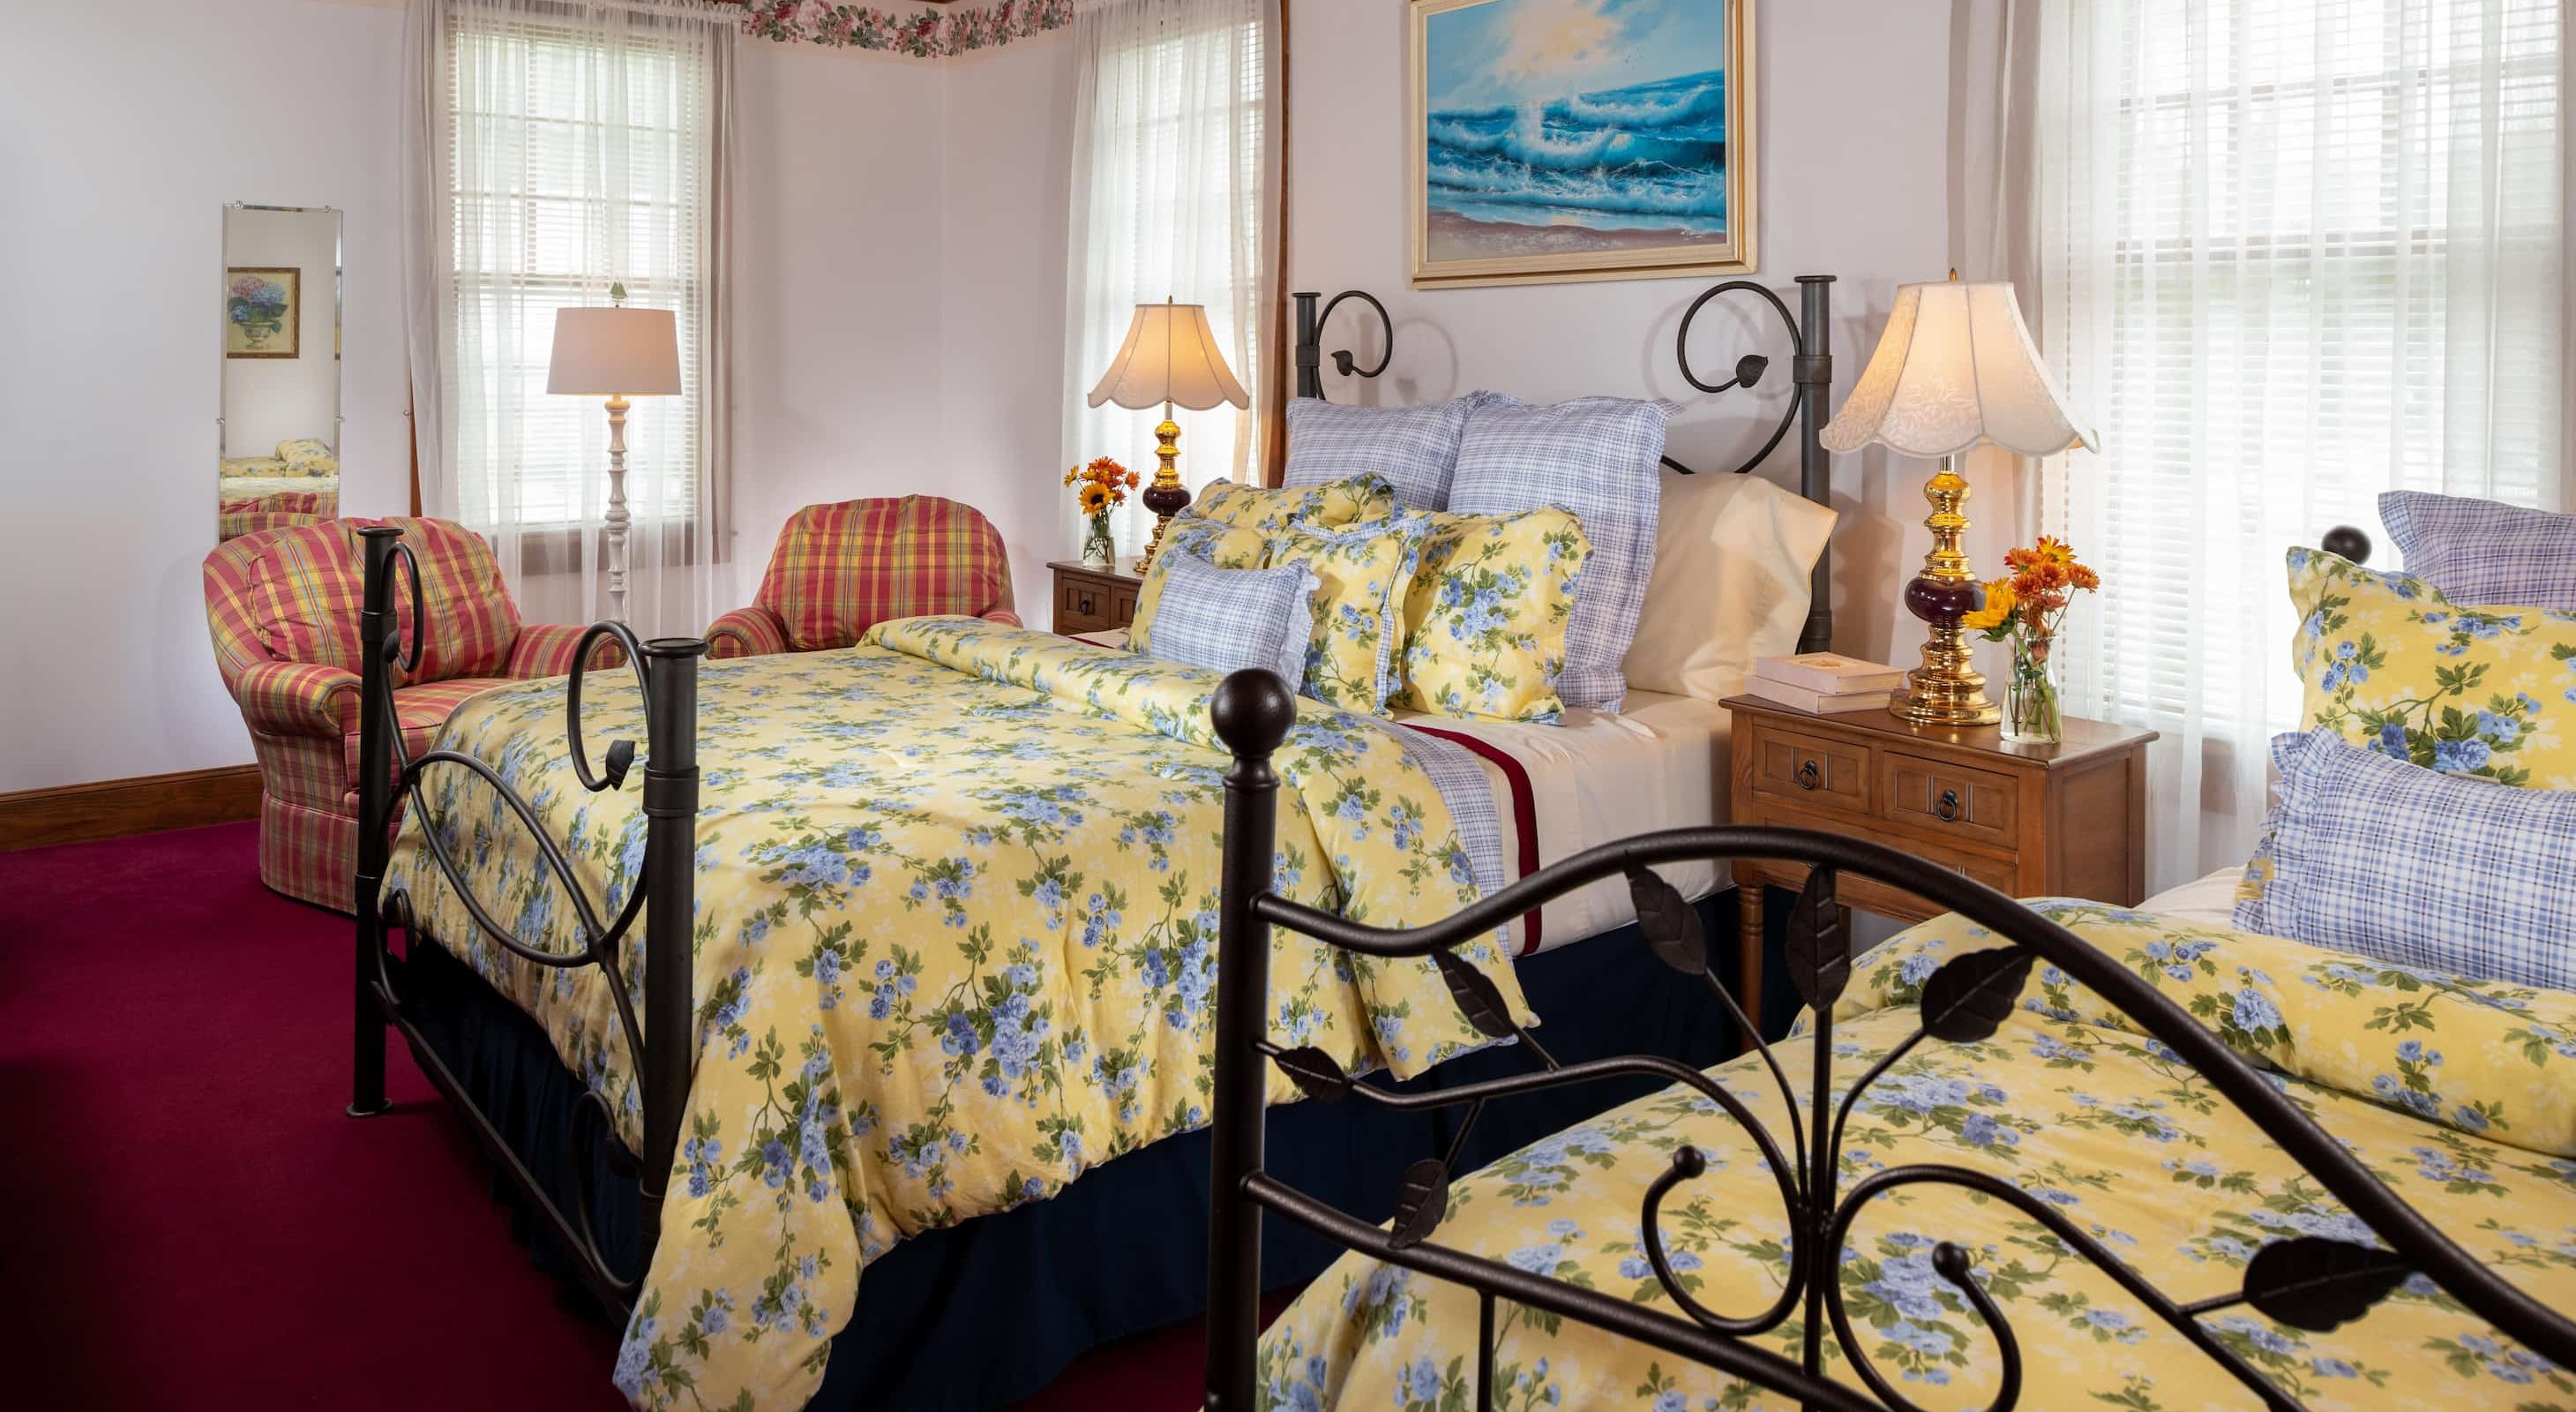 Samuel Langhorne Clemens Room offering one of the best places to stay in Falmouth, MA